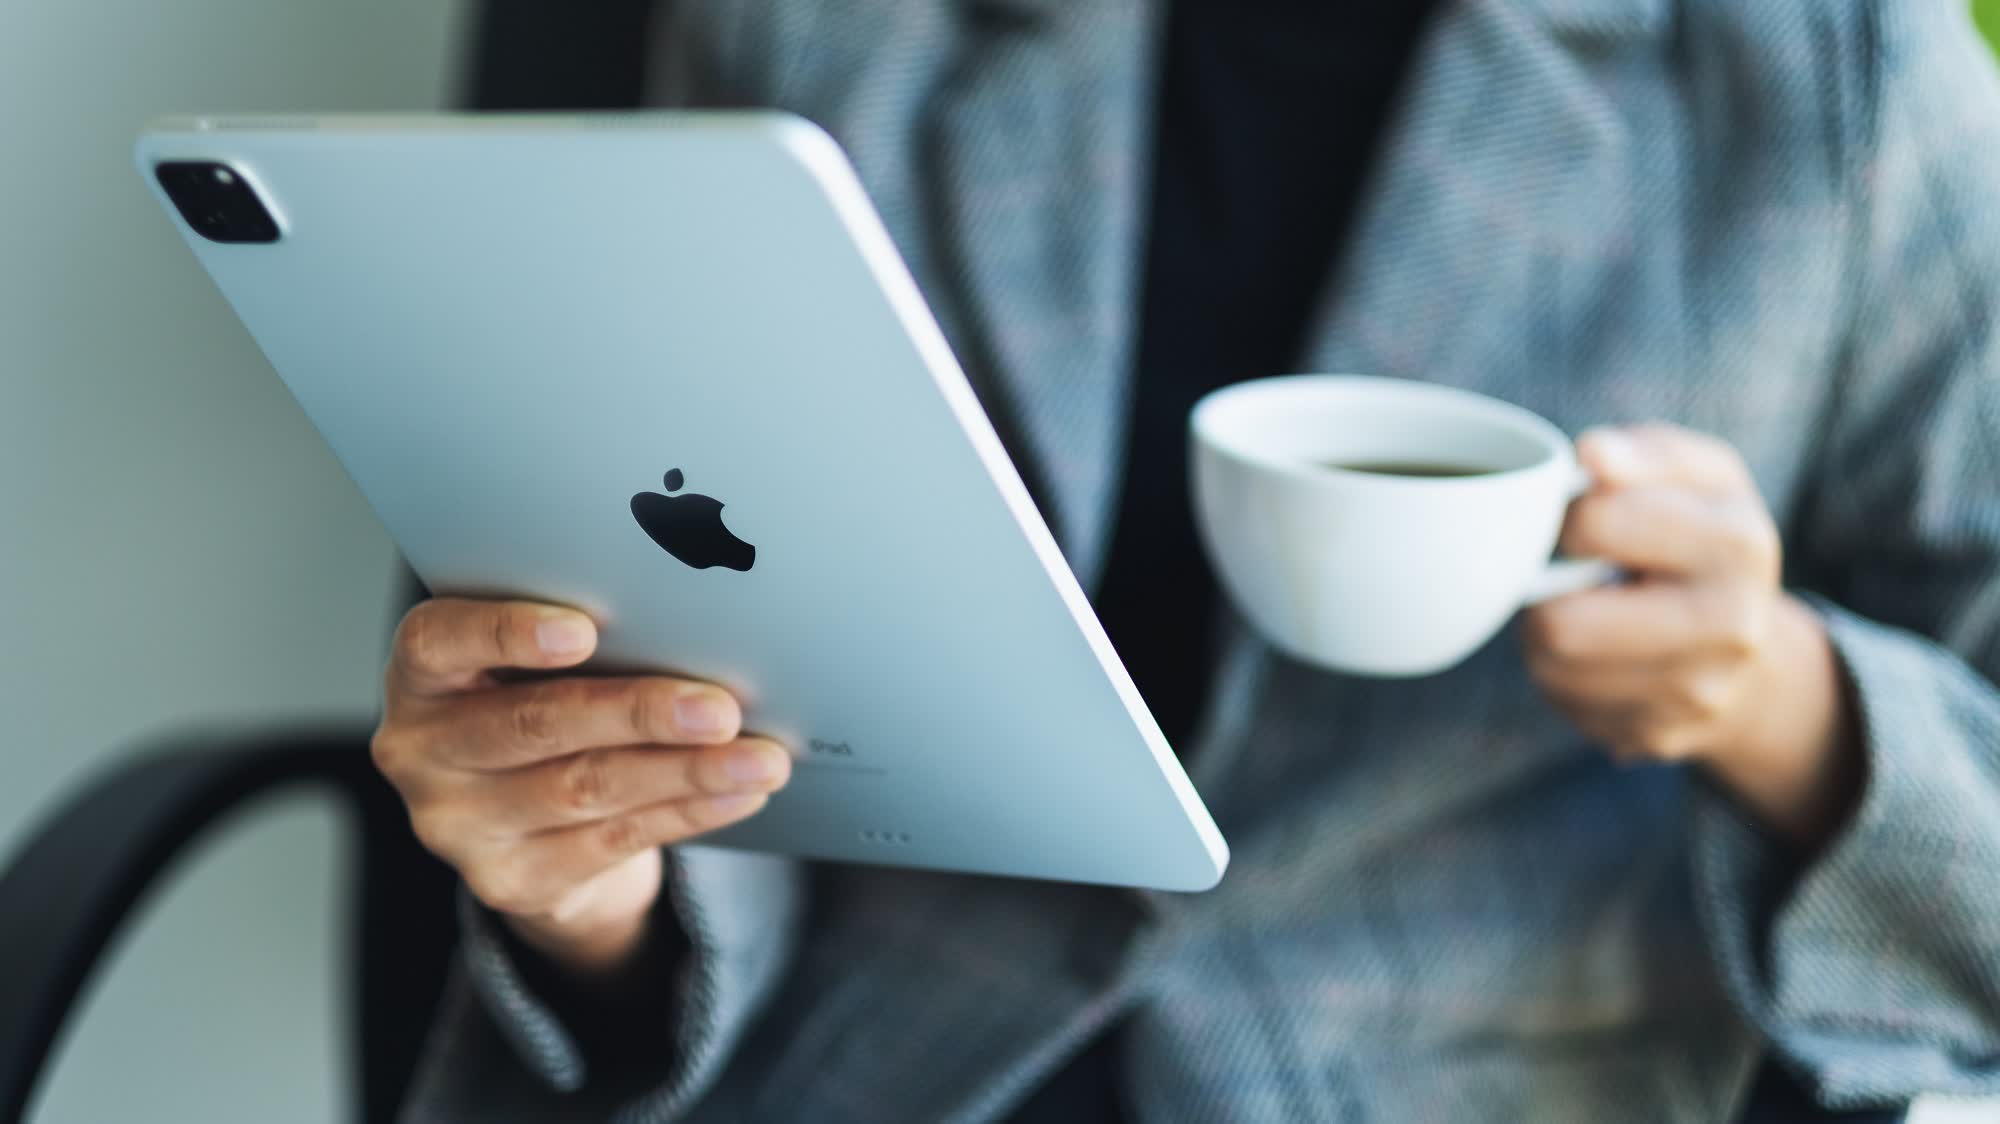 New iPad Pros reportedly launch in April: M1-level performance, Mini-LED screen, Thunderbolt connectivity